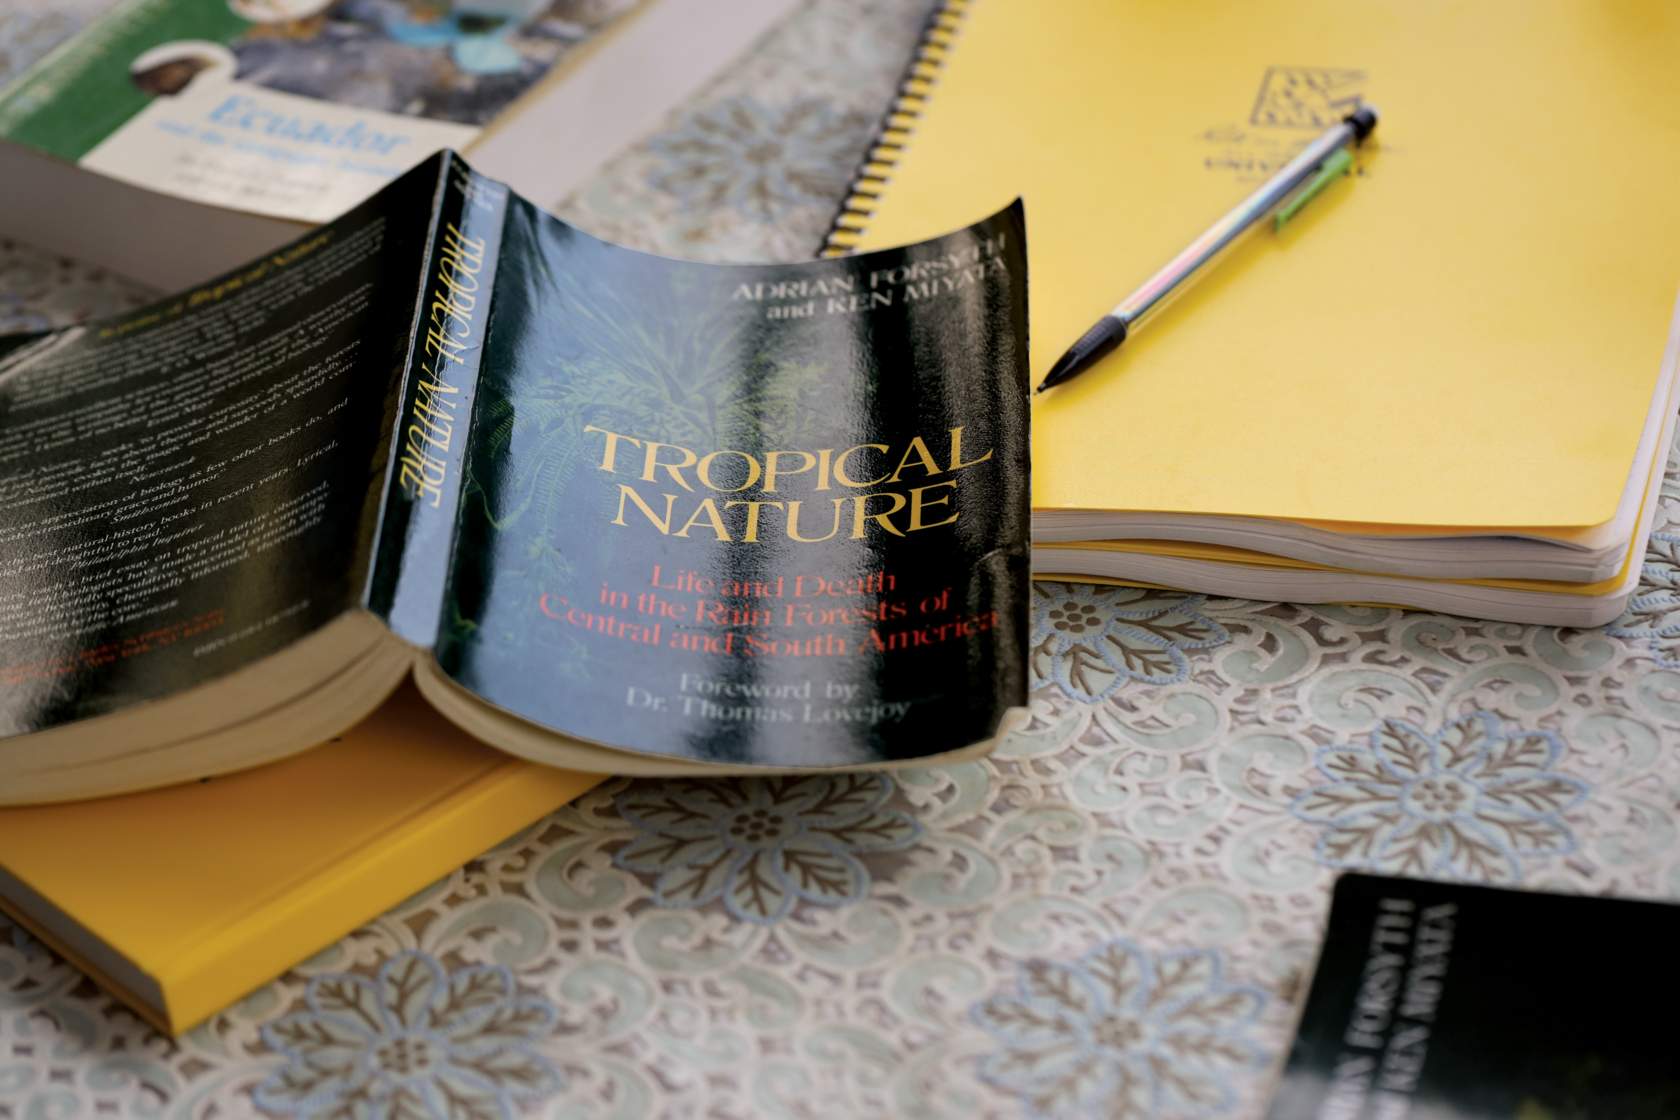 a copy of the book "Tropical Nature" lies open on a table on top of two notebooks